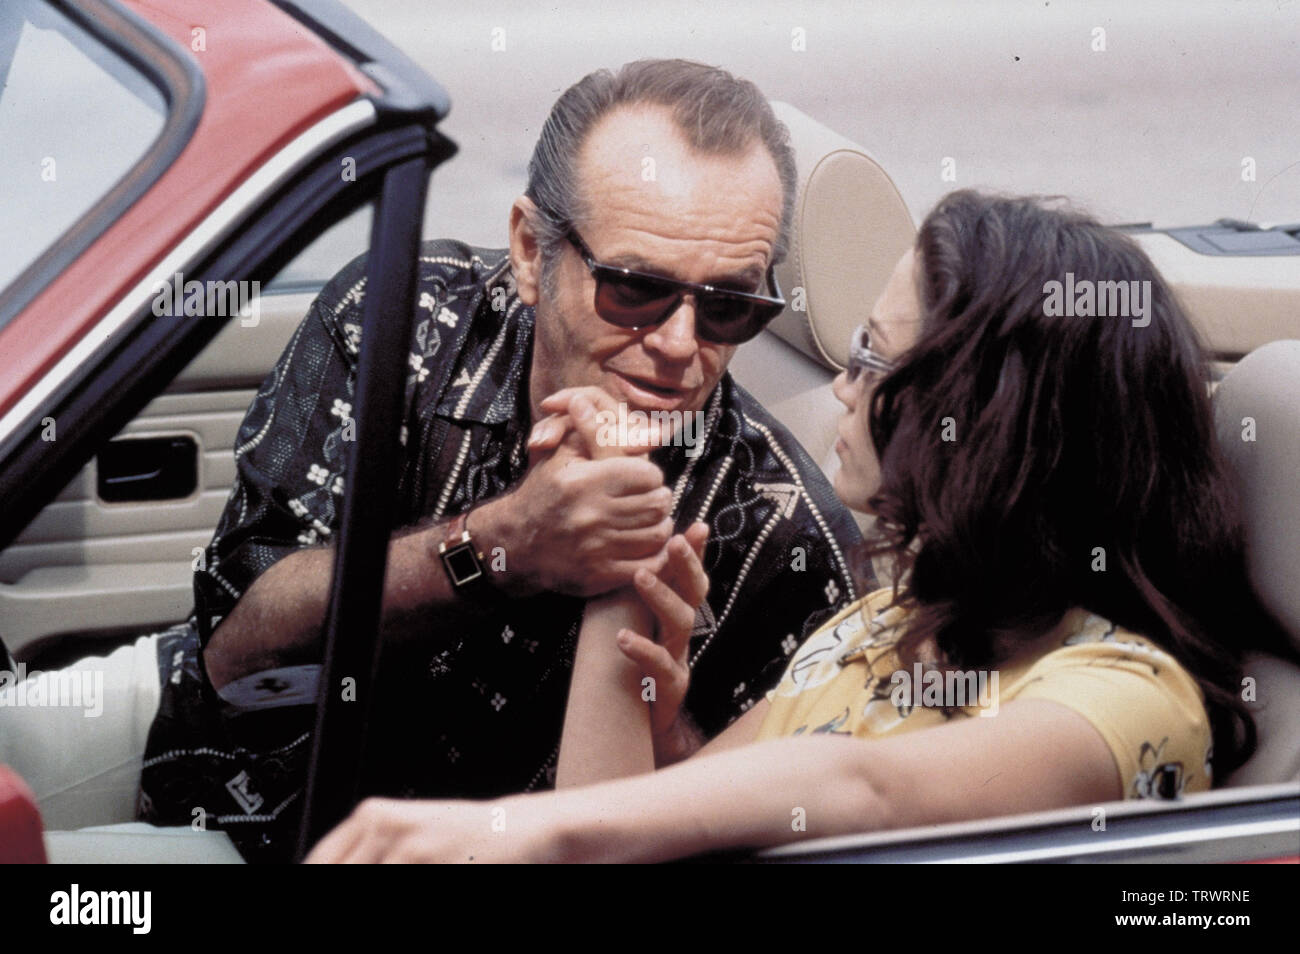 JENNIFER LOPEZ and JACK NICHOLSON in BLOOD AND WINE (1996). Copyright: Editorial use only. No merchandising or book covers. This is a publicly distributed handout. Access rights only, no license of copyright provided. Only to be reproduced in conjunction with promotion of this film. Credit: MAGESTIC FILMS / WATSON, GLEN / Album Stock Photo